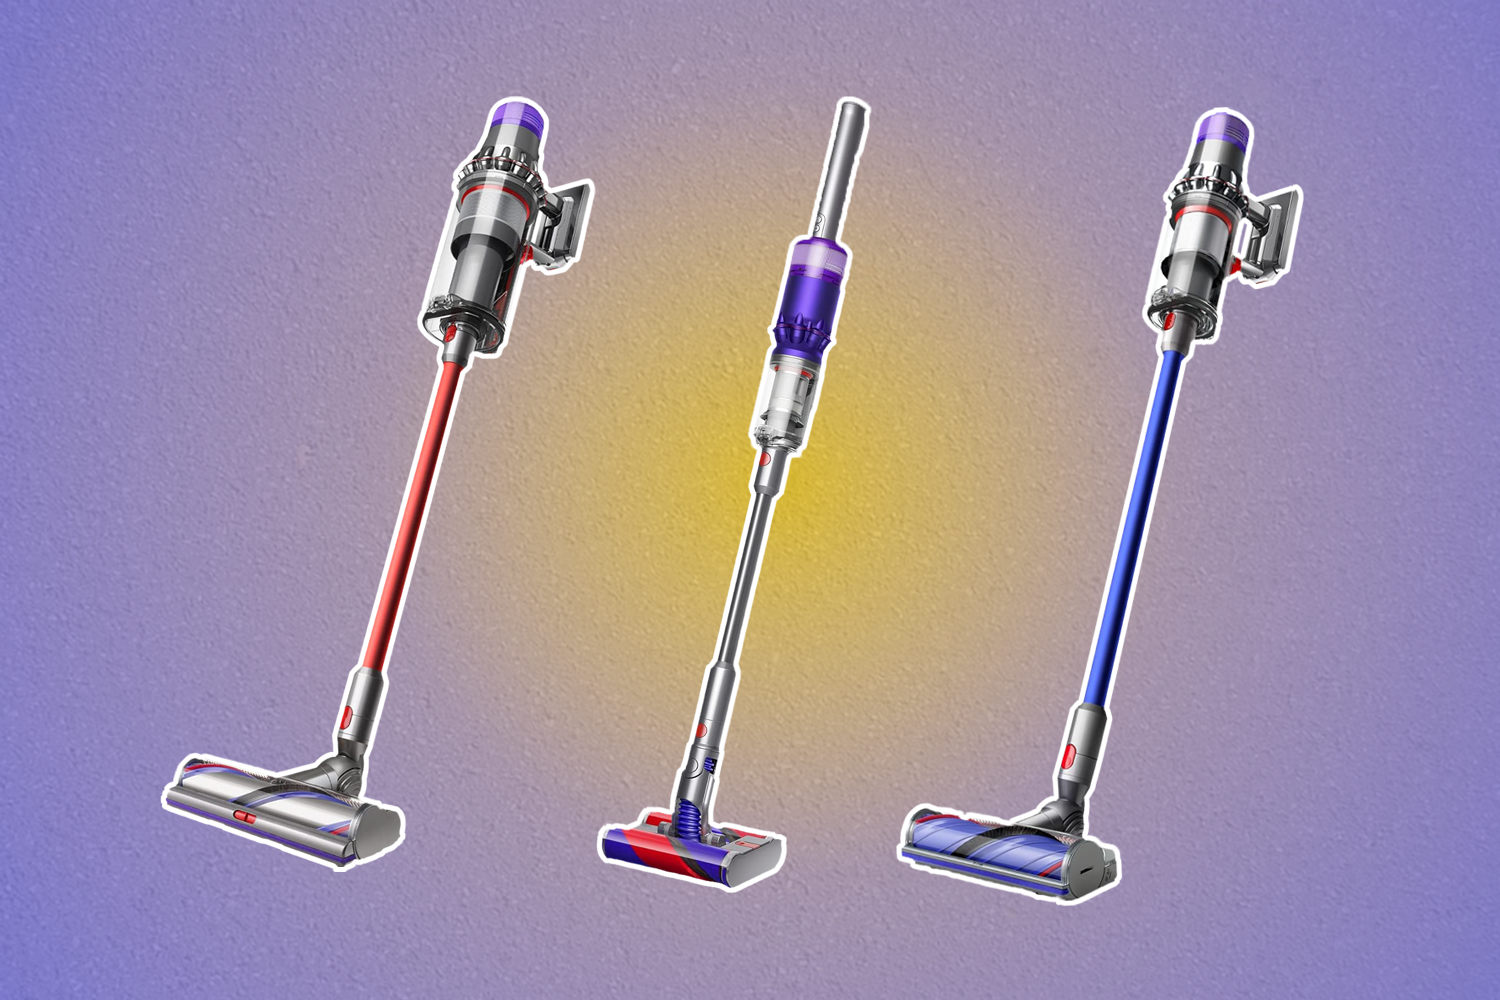 Dyson Deals on blue and yellow grain background